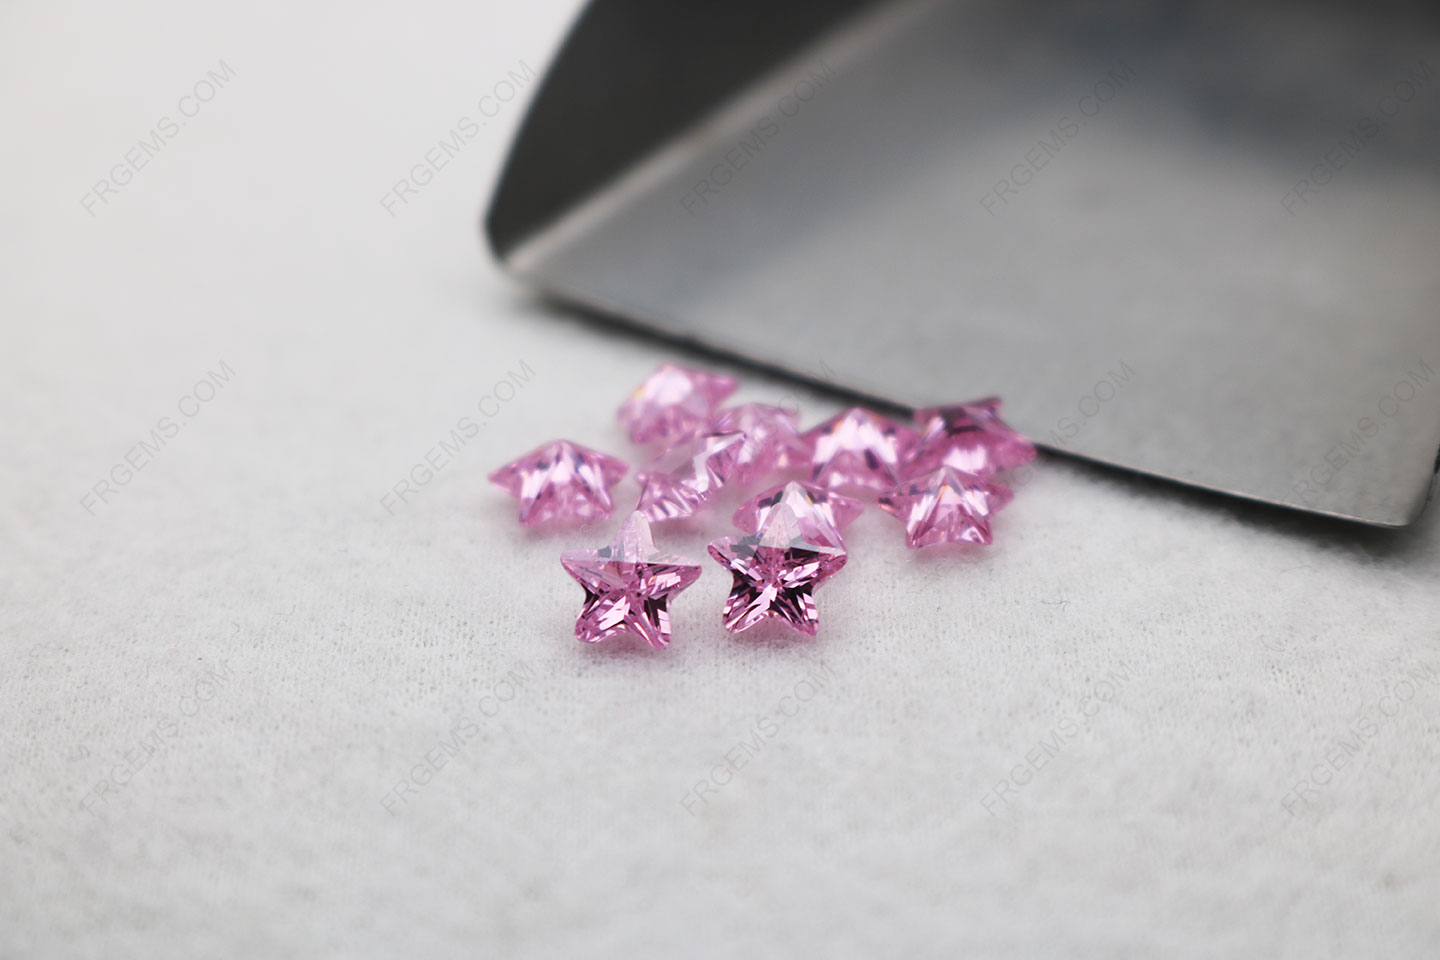 Cubic Zirconia Pink color Five point Star Cut 6x6mm gemstones CZ03 IMG_5459